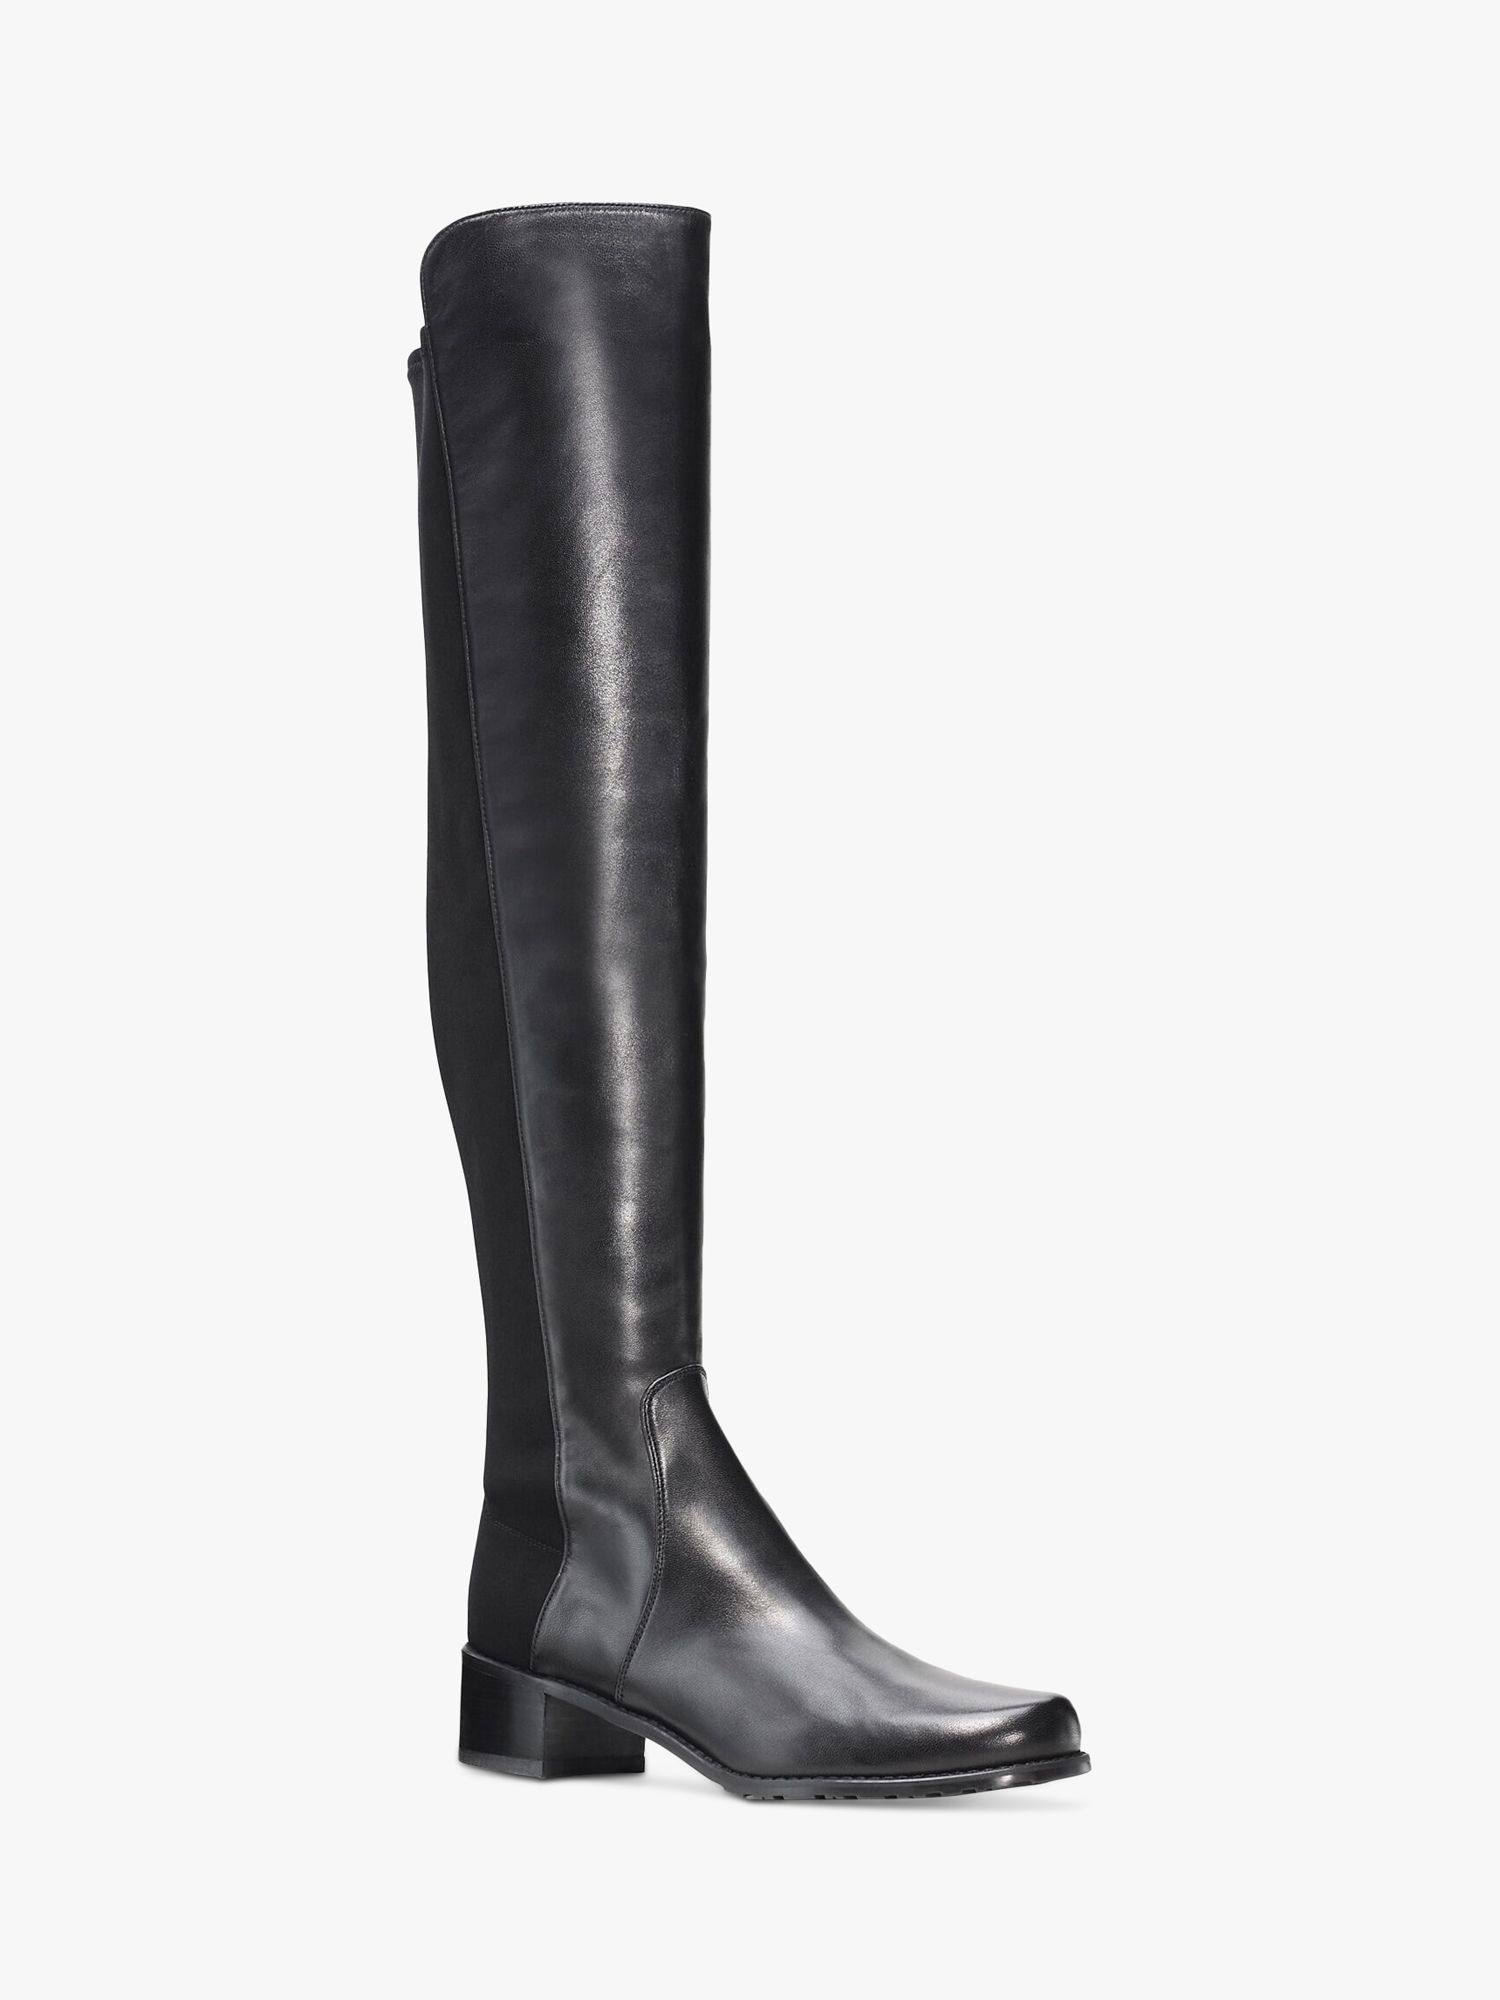 Stuart Weitzman Reserve Leather Over The Knee Boots, Black at John ...